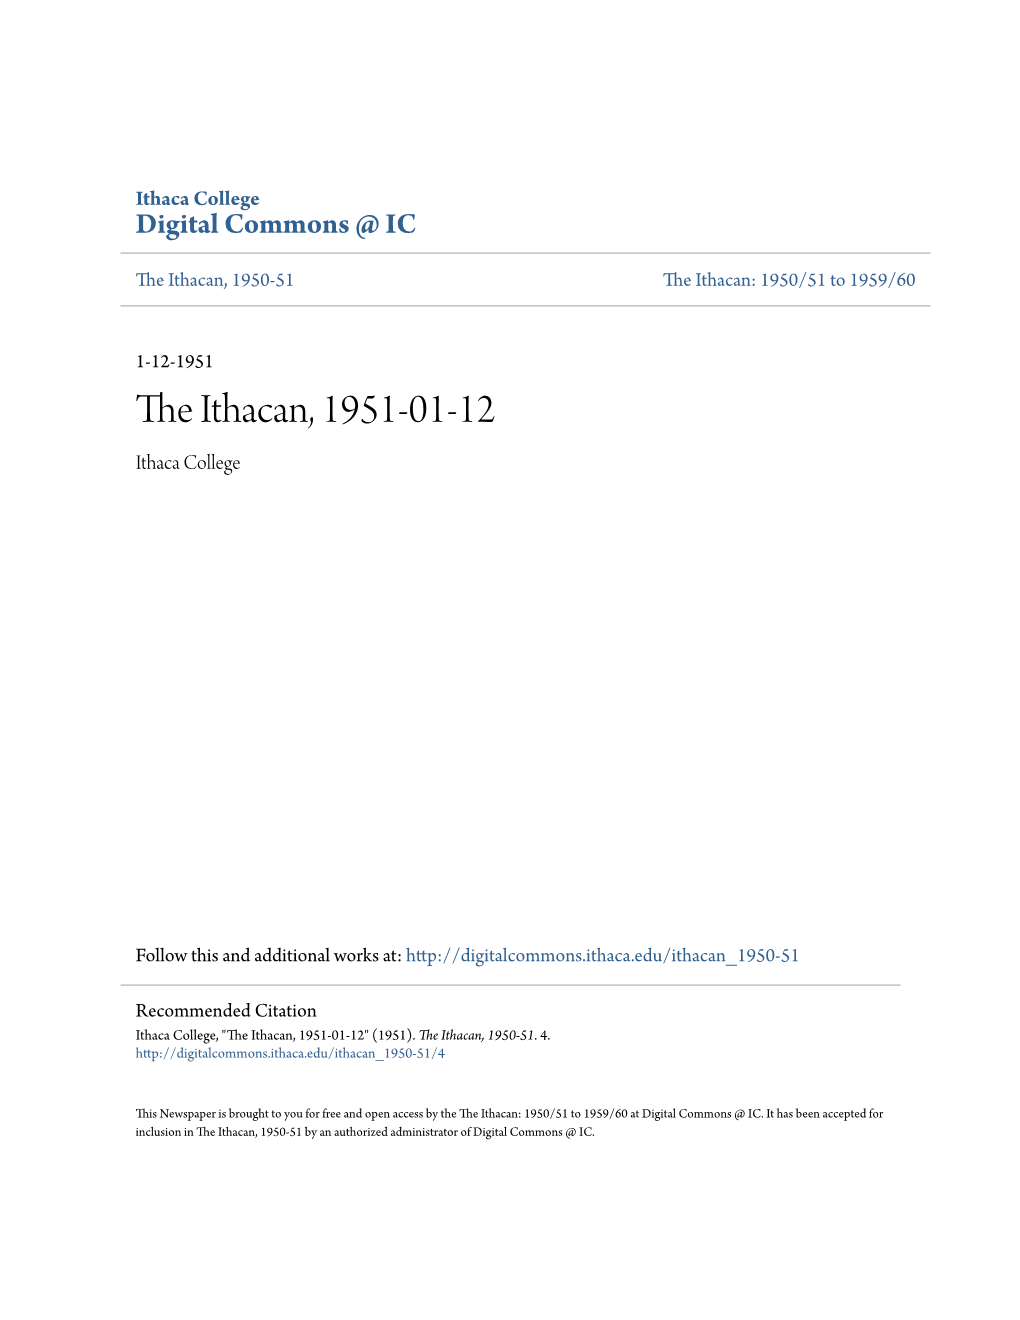 The Ithacan, 1951-01-12